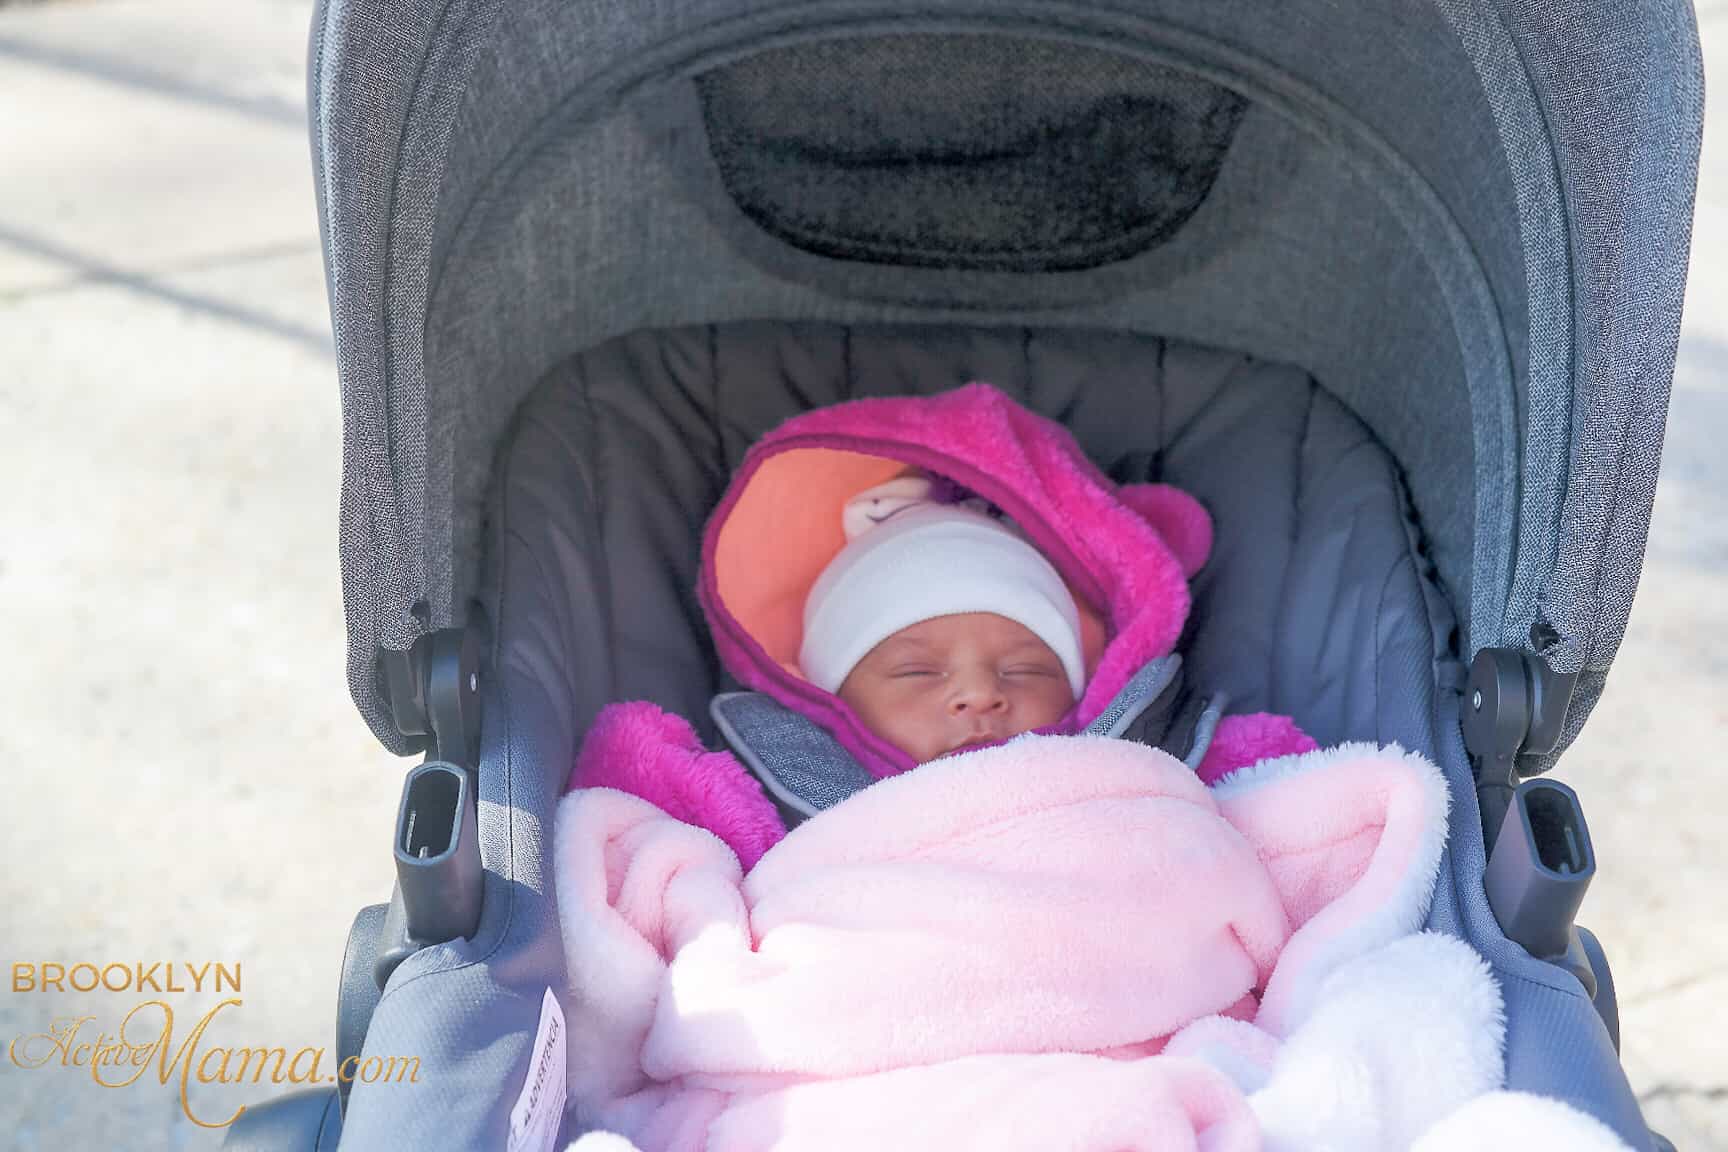 One of the most important accessories for a new baby is your stroller. Check out this full review of the Evenflo Pivot Xpand